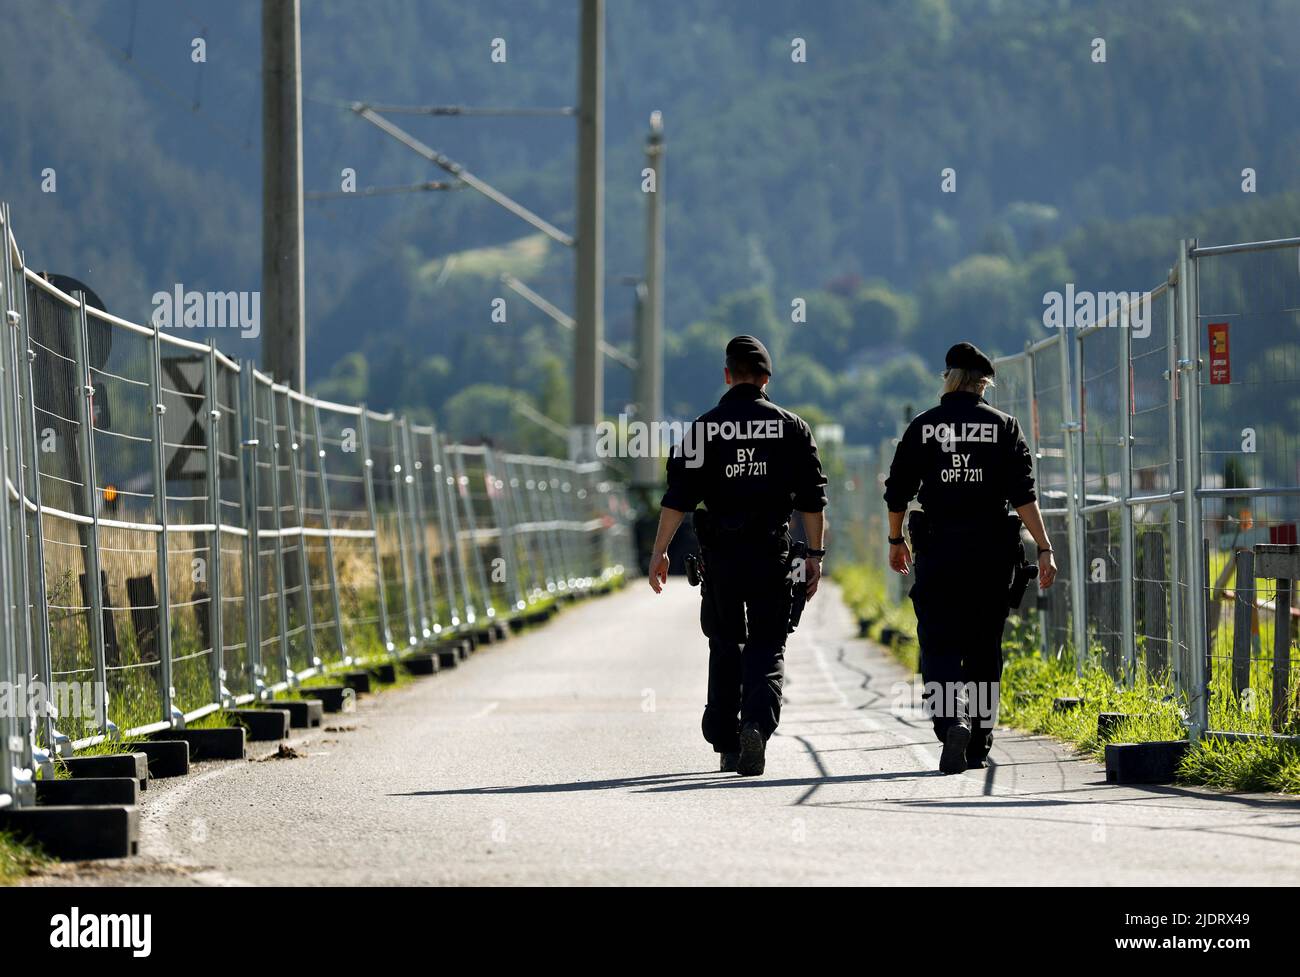 German police guards area around the southern Bavarian resort where the G7 Summit will be held, in Garmisch-Partenkirchen, Germany, June 23, 2022. REUTERS/Michaela Rehle Stock Photo